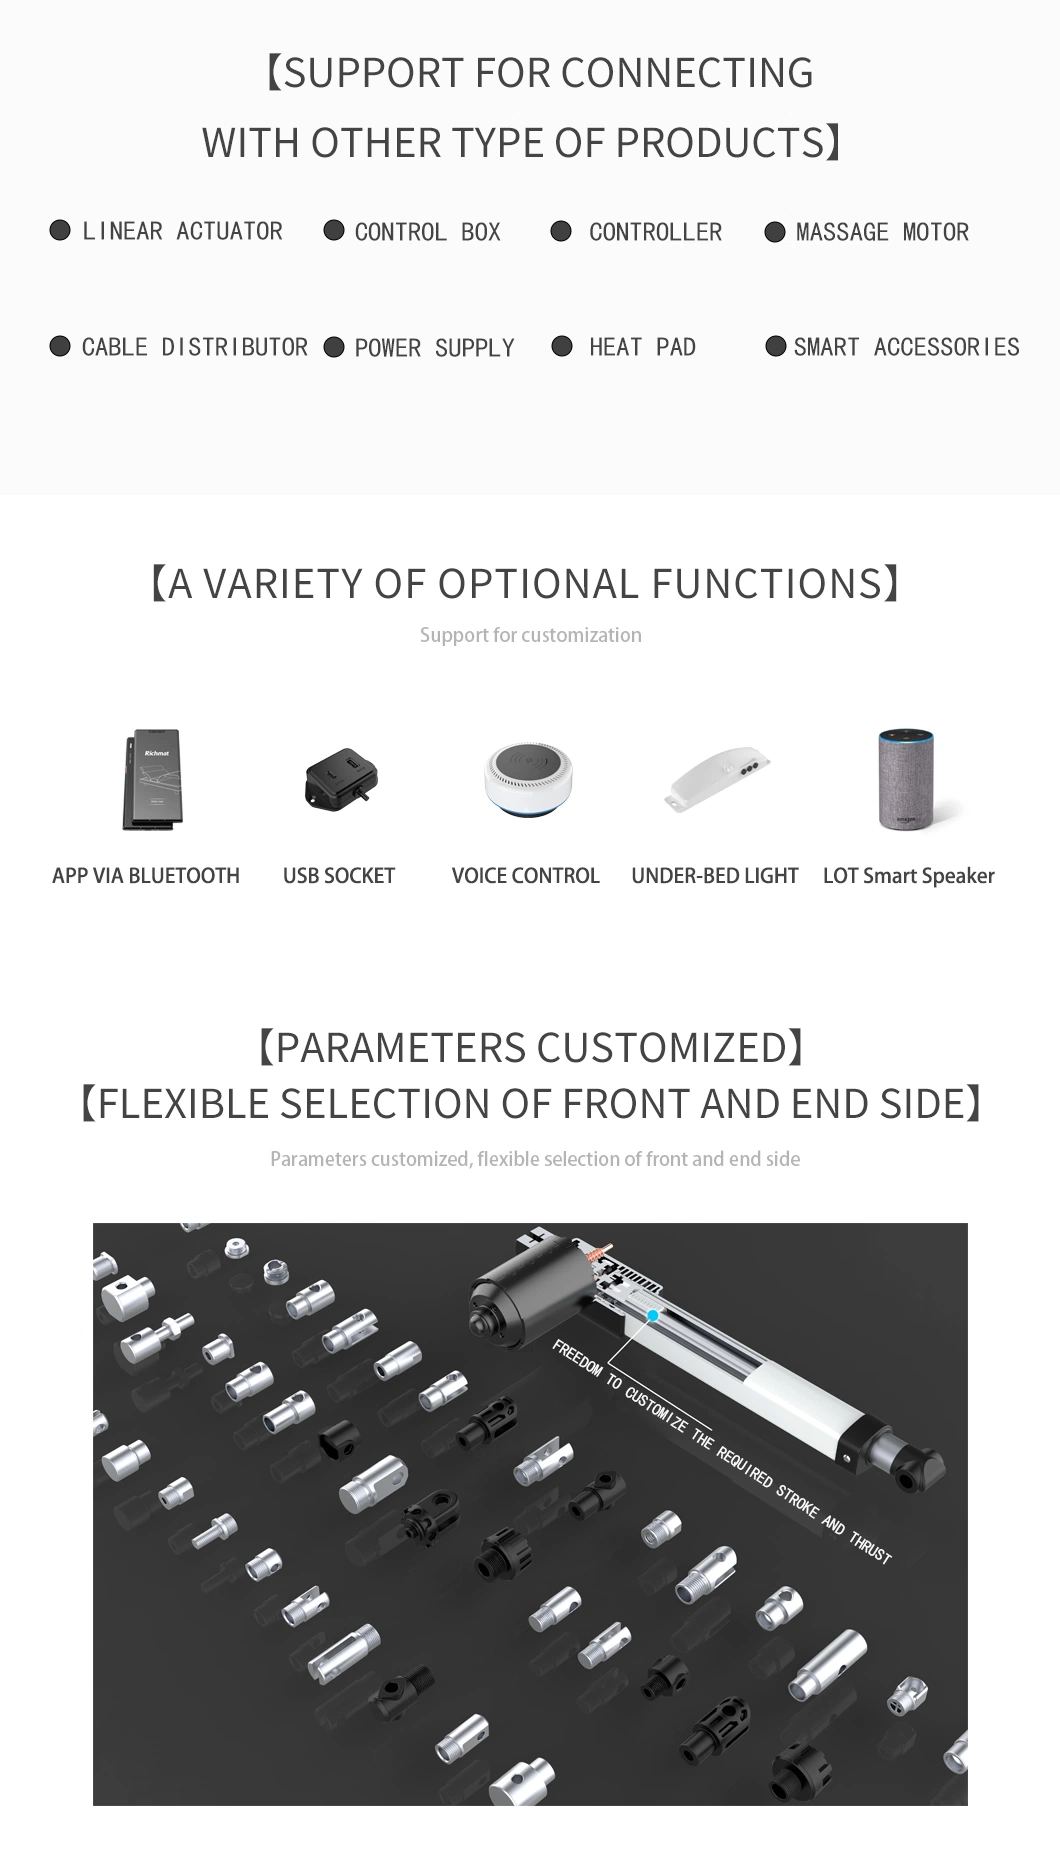 Richamat Professional Manufacturer of Linear Actuator with Wholesale Price